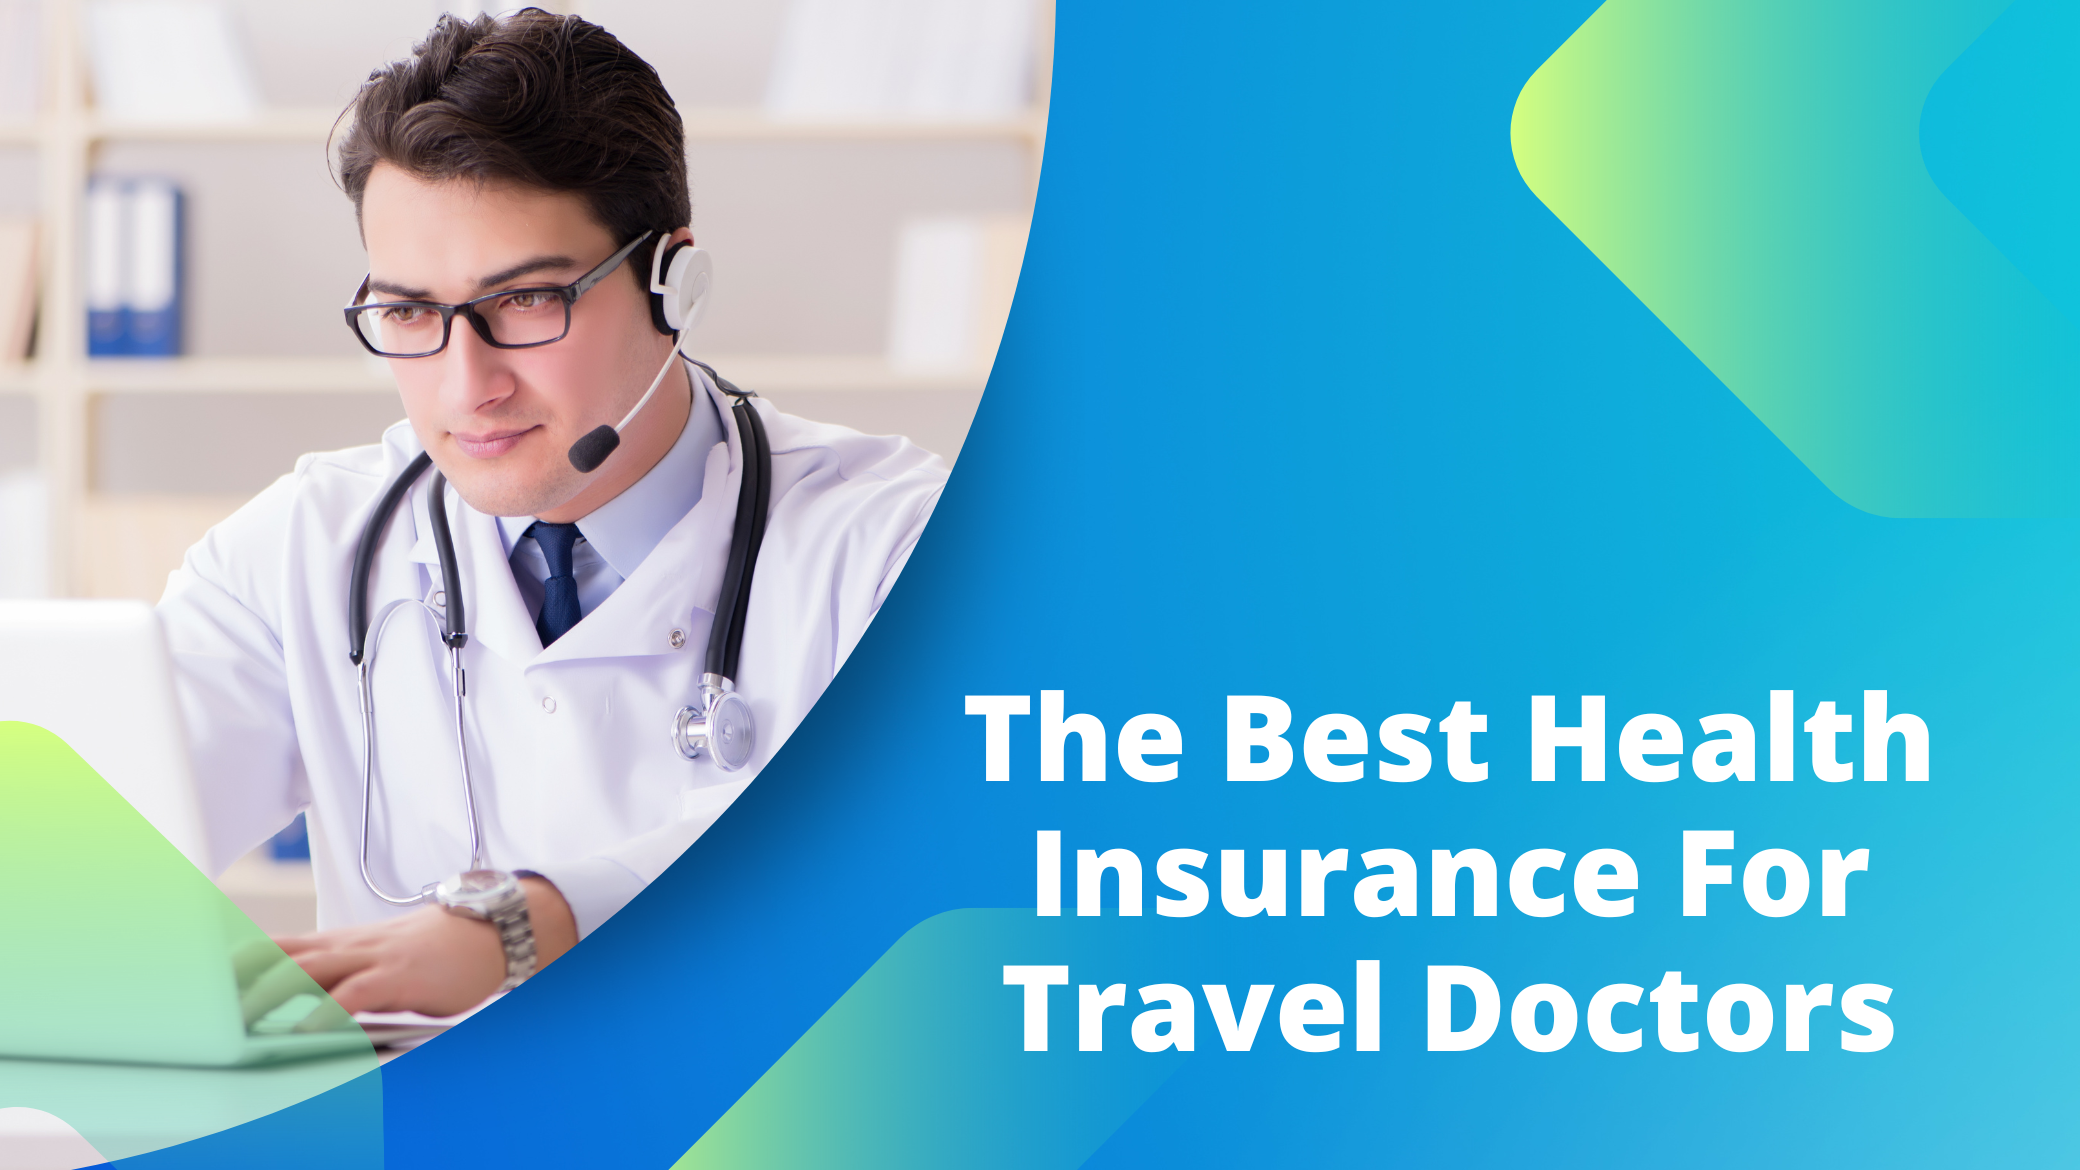 The Best Health Insurance For Travel Doctors